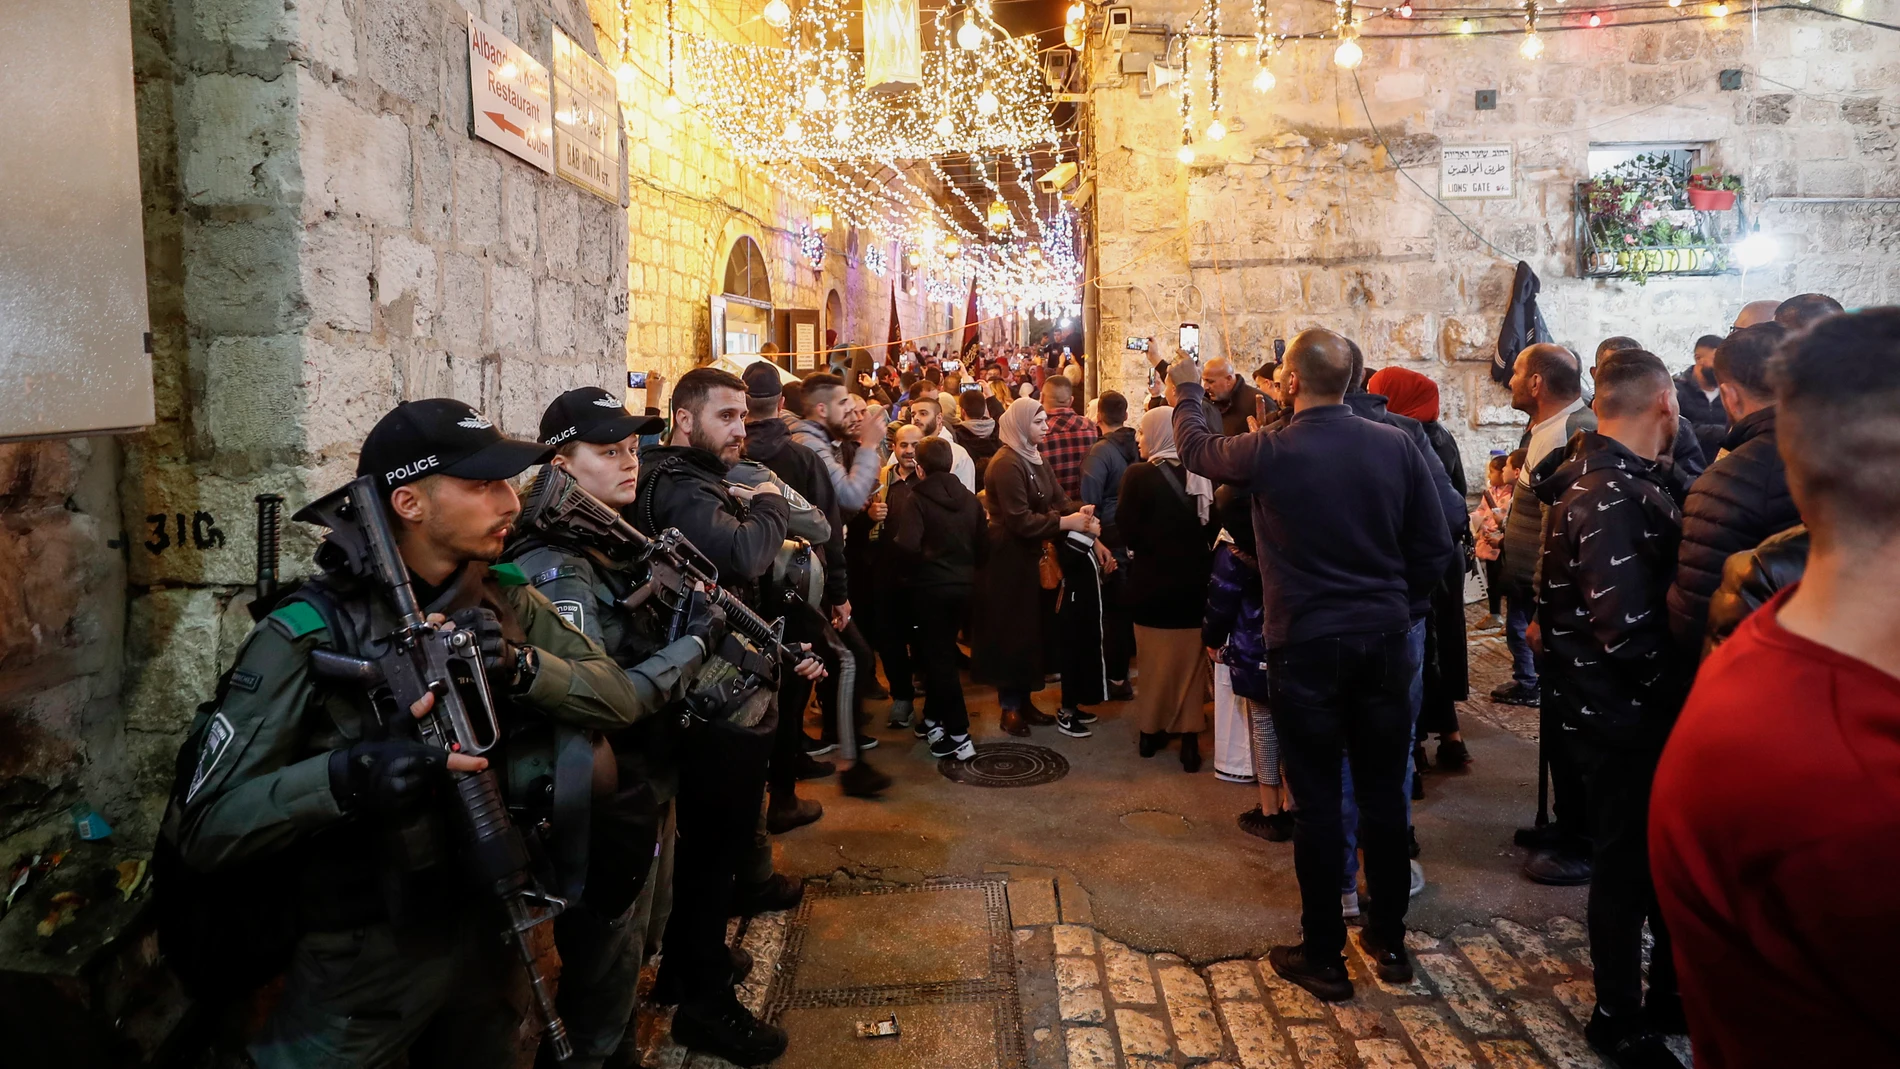 Jerusalem (--), 23/03/2023.- Israeli police guard the alleys of Jerusalem's old city as Palestinian worshippers make their way out of Al-Aqsa Mosque after the first night of prayer in the Muslim holy month of Ramadan, in Jerusalem, 23 March 2023. Muslims around the world celebrate the holy month of Ramadan by praying during the night time and abstaining from eating, drinking, and sexual acts during the period between sunrise and sunset. Ramadan is the ninth month in the Islamic calendar, and it is believed that the revelation of the first verse in the Koran was during its last 10 nights. (Estados Unidos, Jerusalén) EFE/EPA/ATEF SAFADI